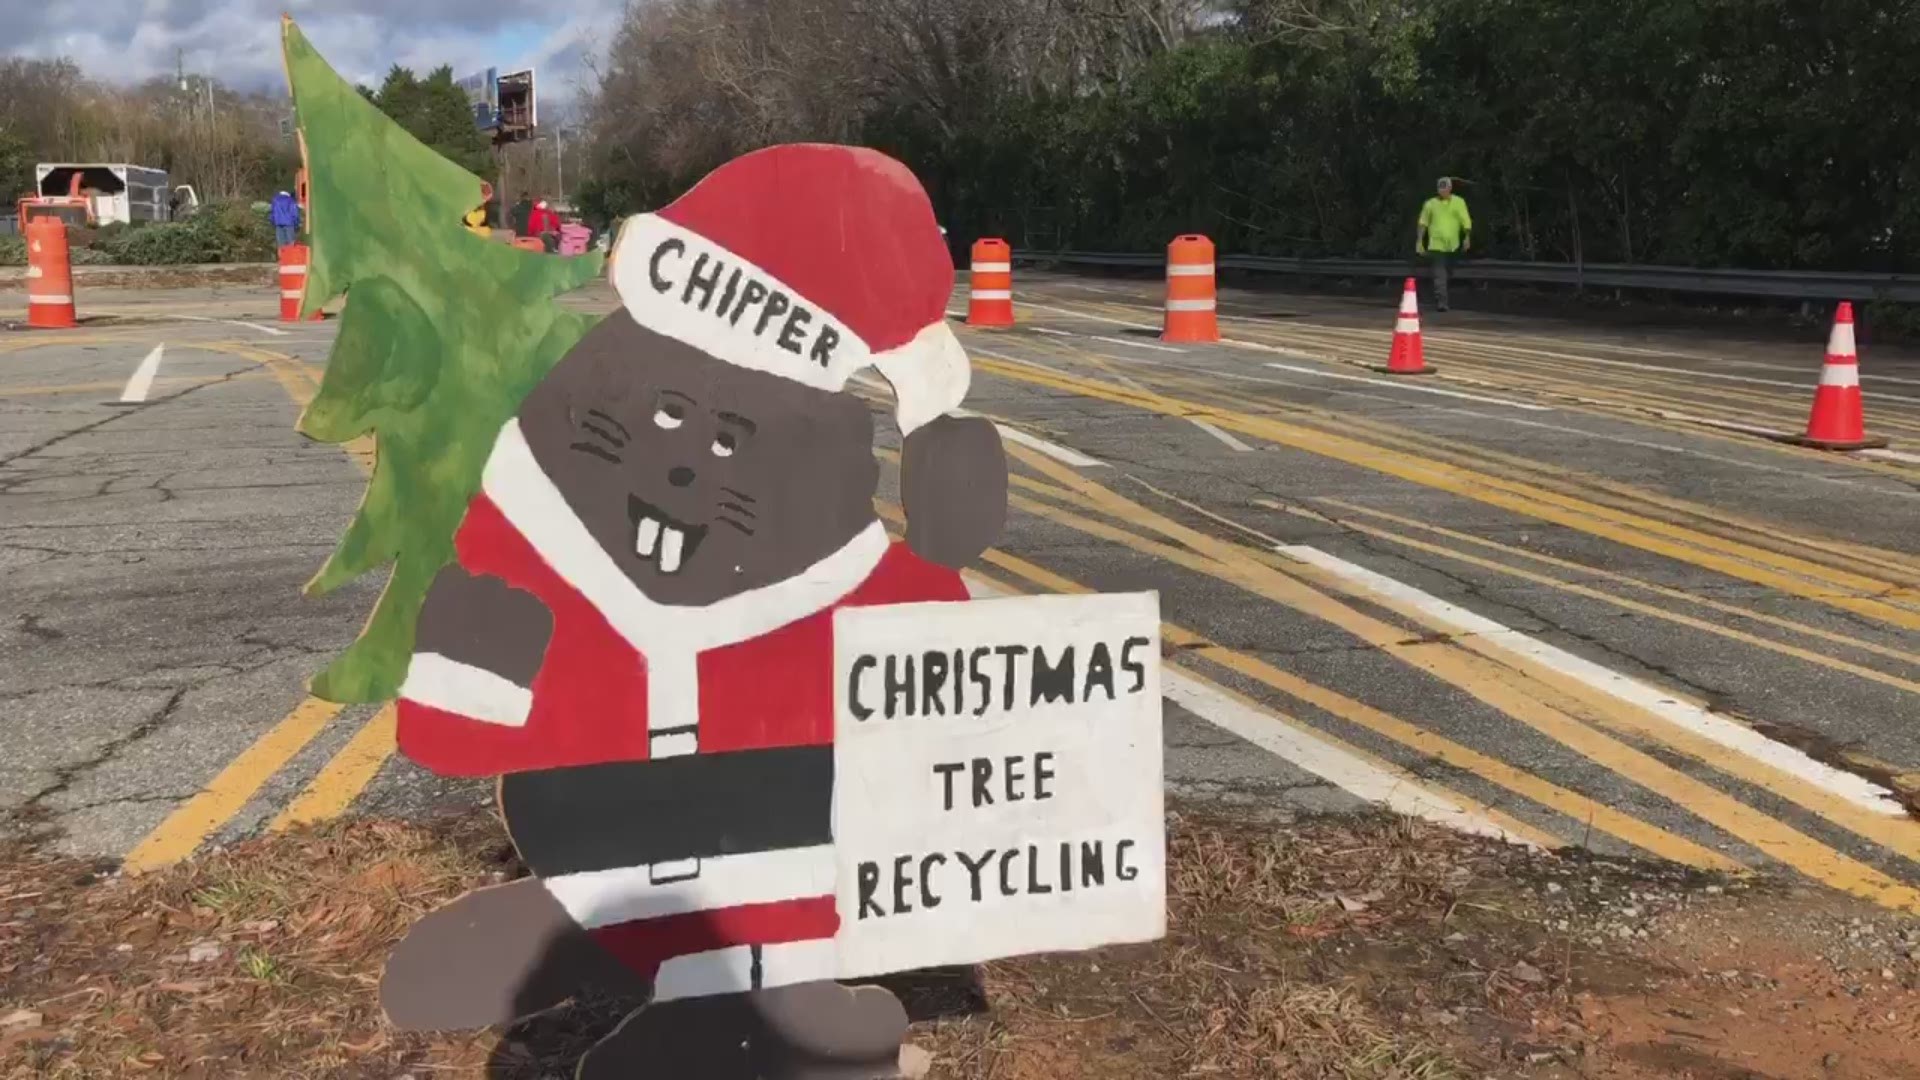 On Saturday people in Bibb County packed up their Christmas trees and took them to be recycled for the 39th annual Bring One for the Chipper event on Riverside Drive